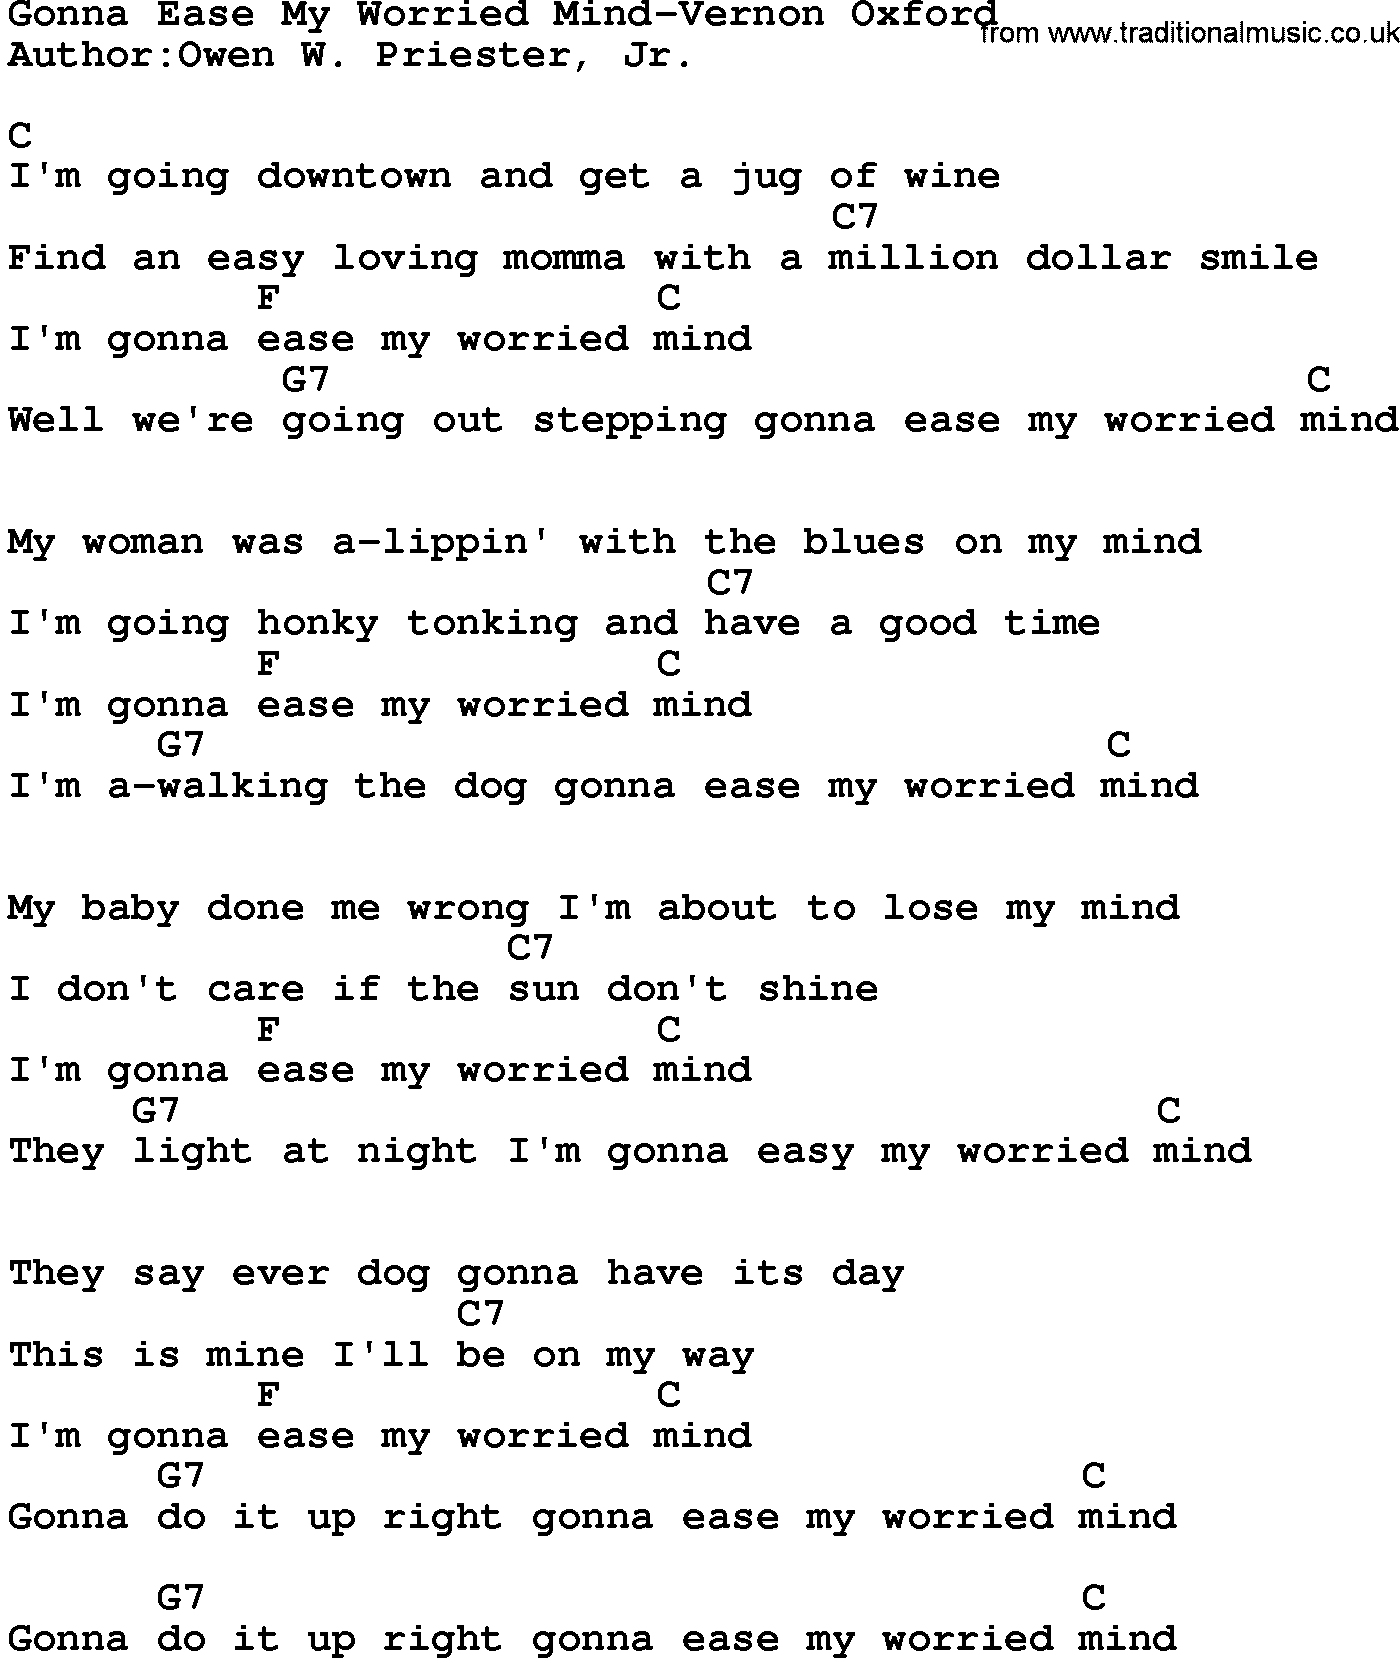 Country music song: Gonna Ease My Worried Mind-Vernon Oxford lyrics and chords